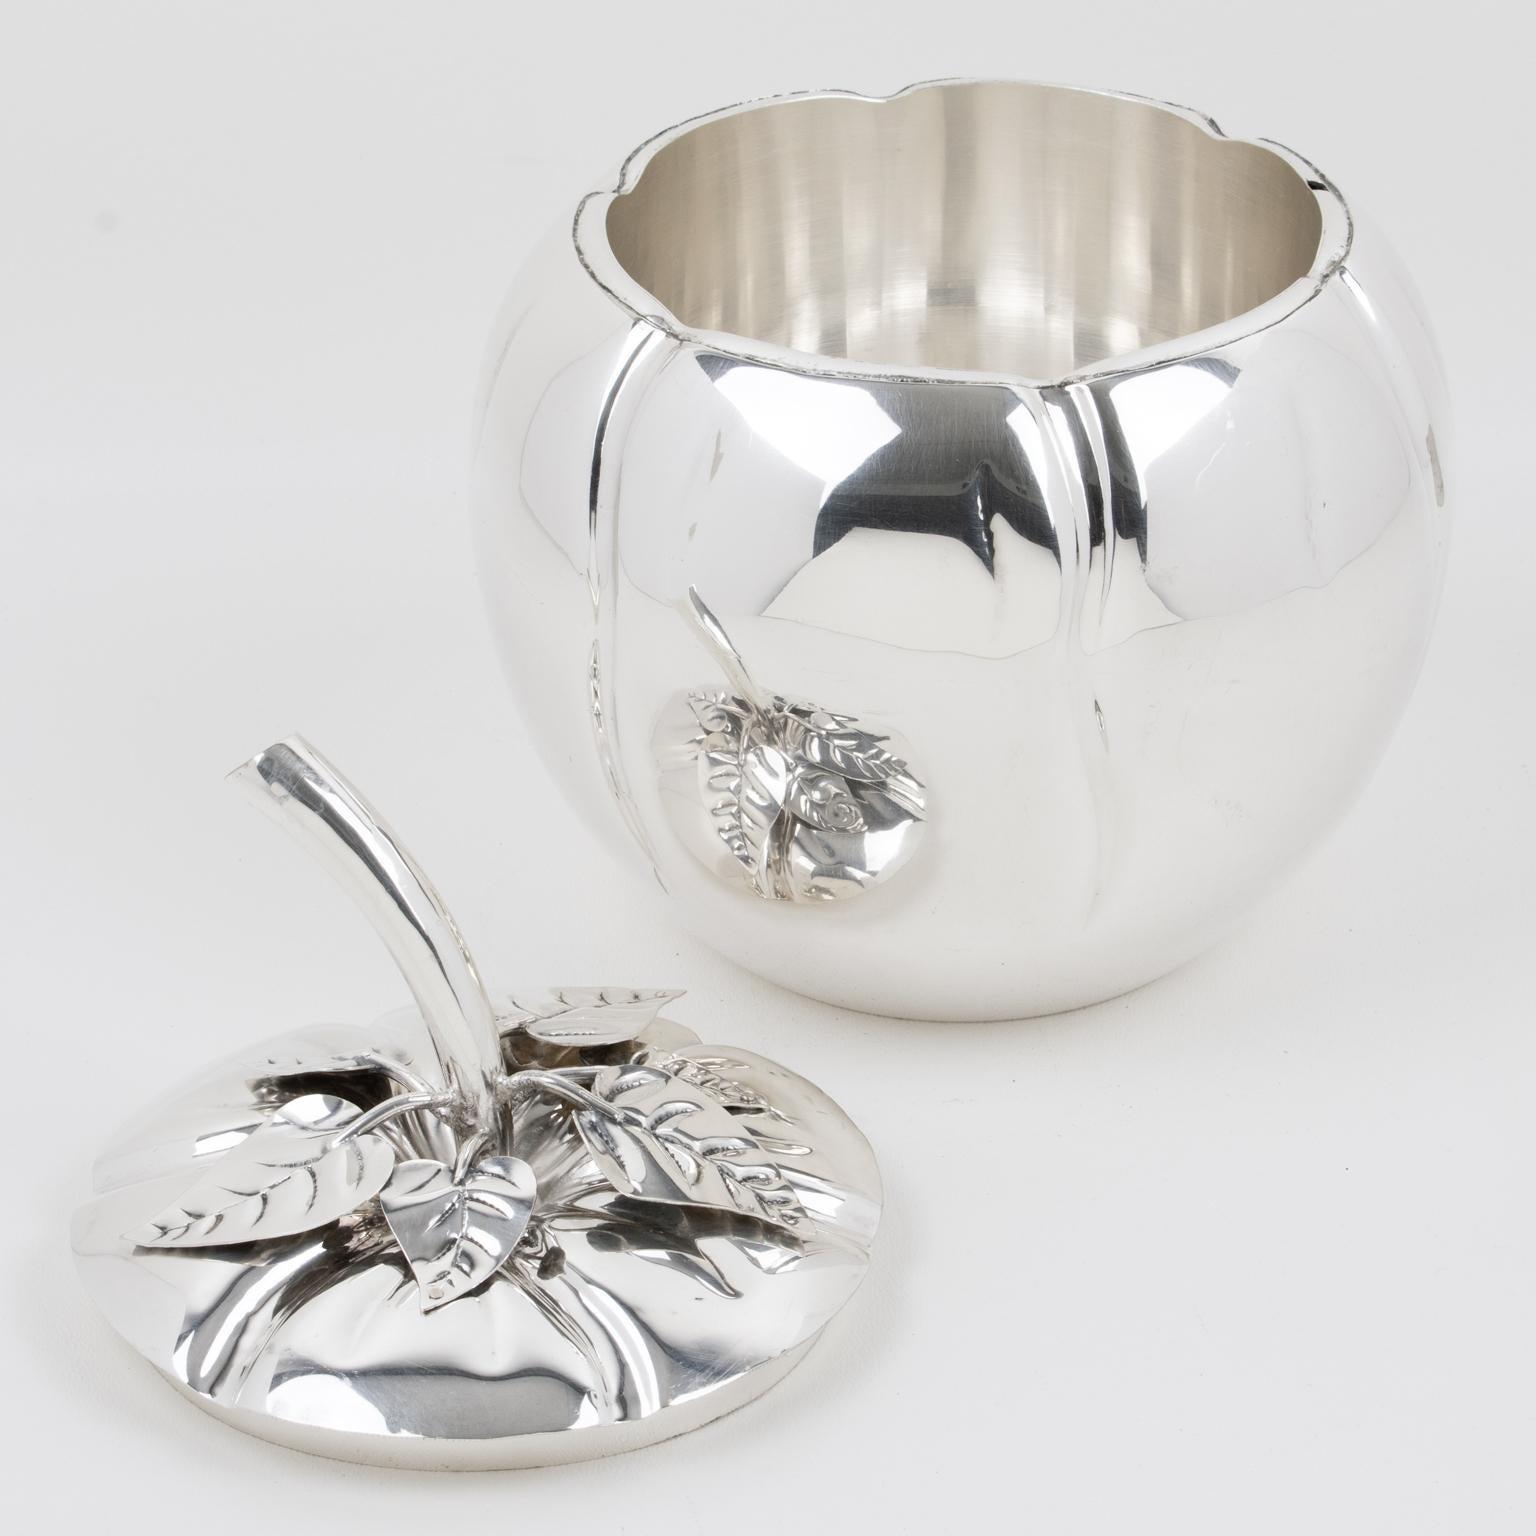 Modern Teghini Firenze Silver Plate Tomato-shaped Ice Bucket, Italy 1960s For Sale